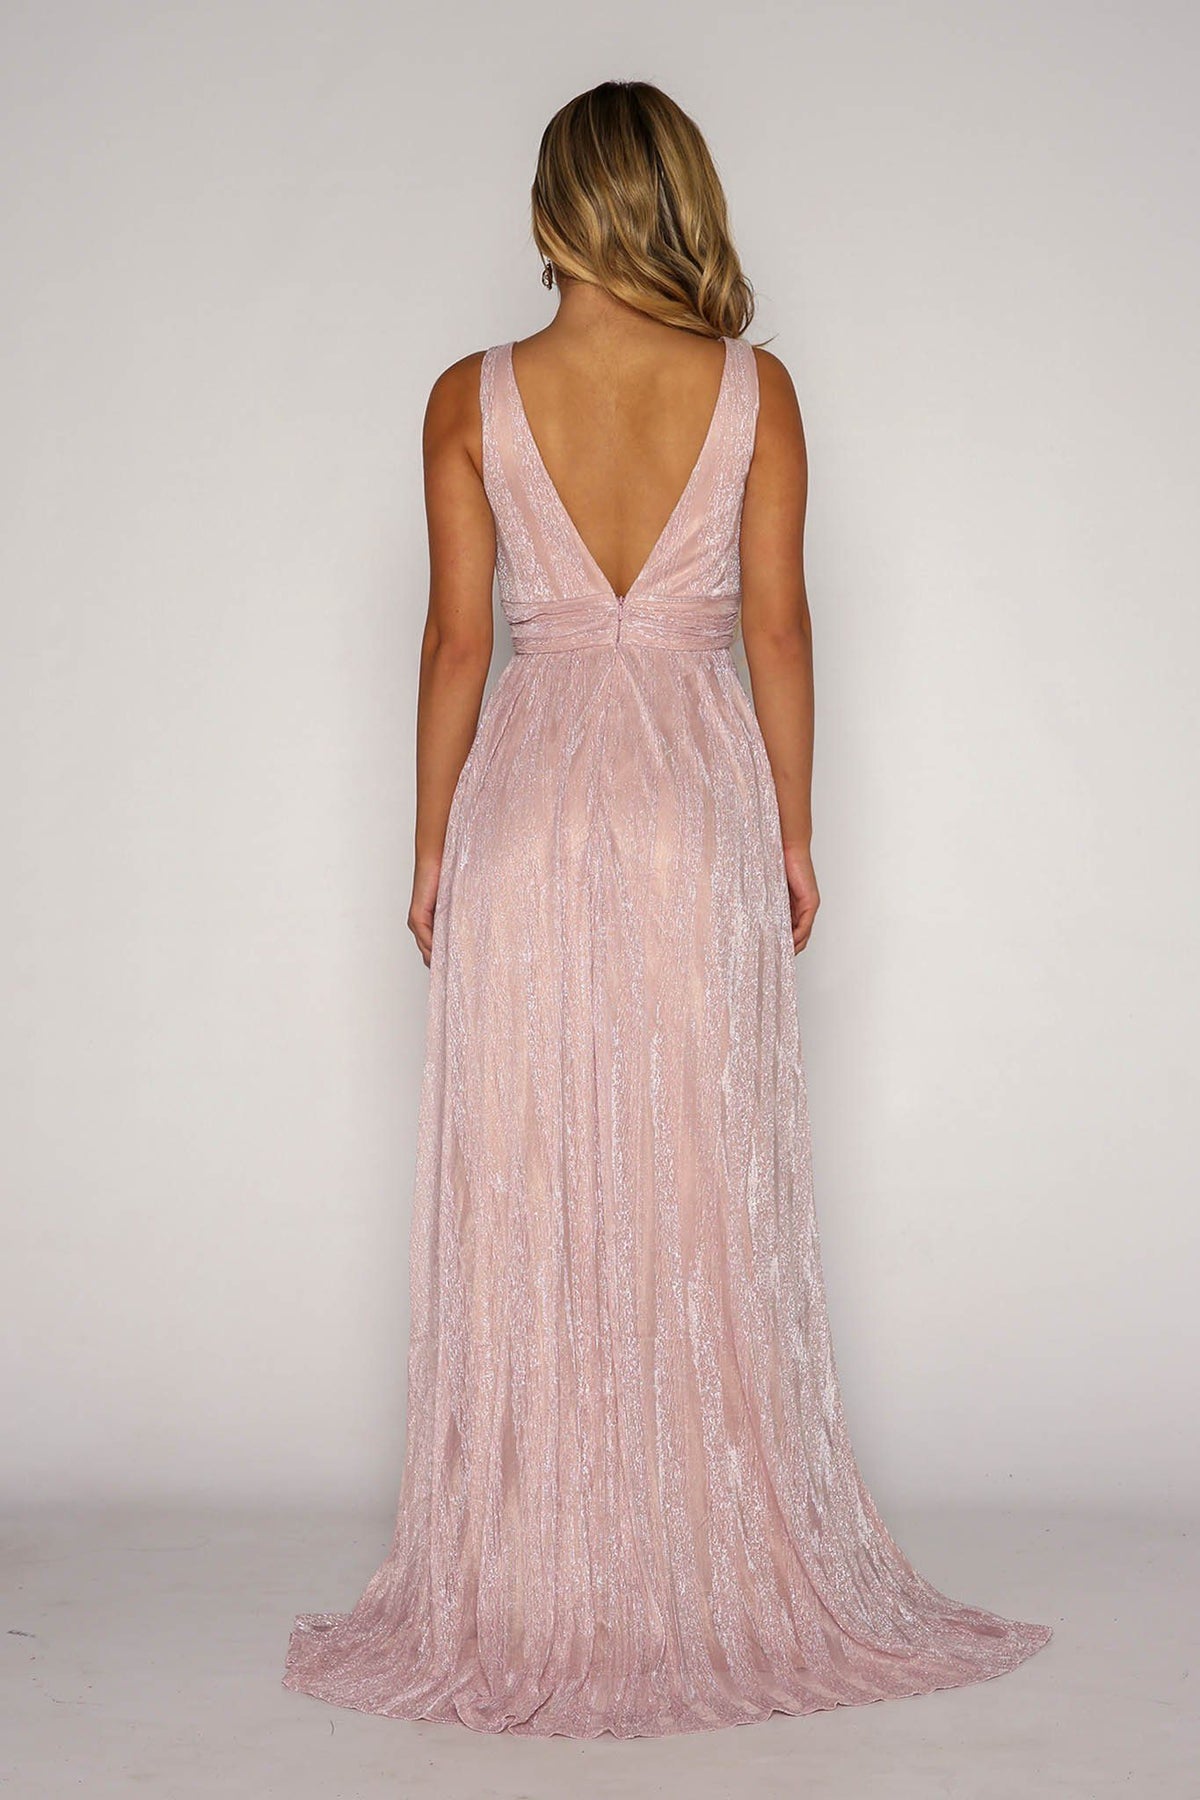 Open Back Design of Shimmer Pink Grecian Style Full Length A-Line Gown featuring Gathered Waistline, Draping Throughout the Skirt and V Neckline with Mesh Insert